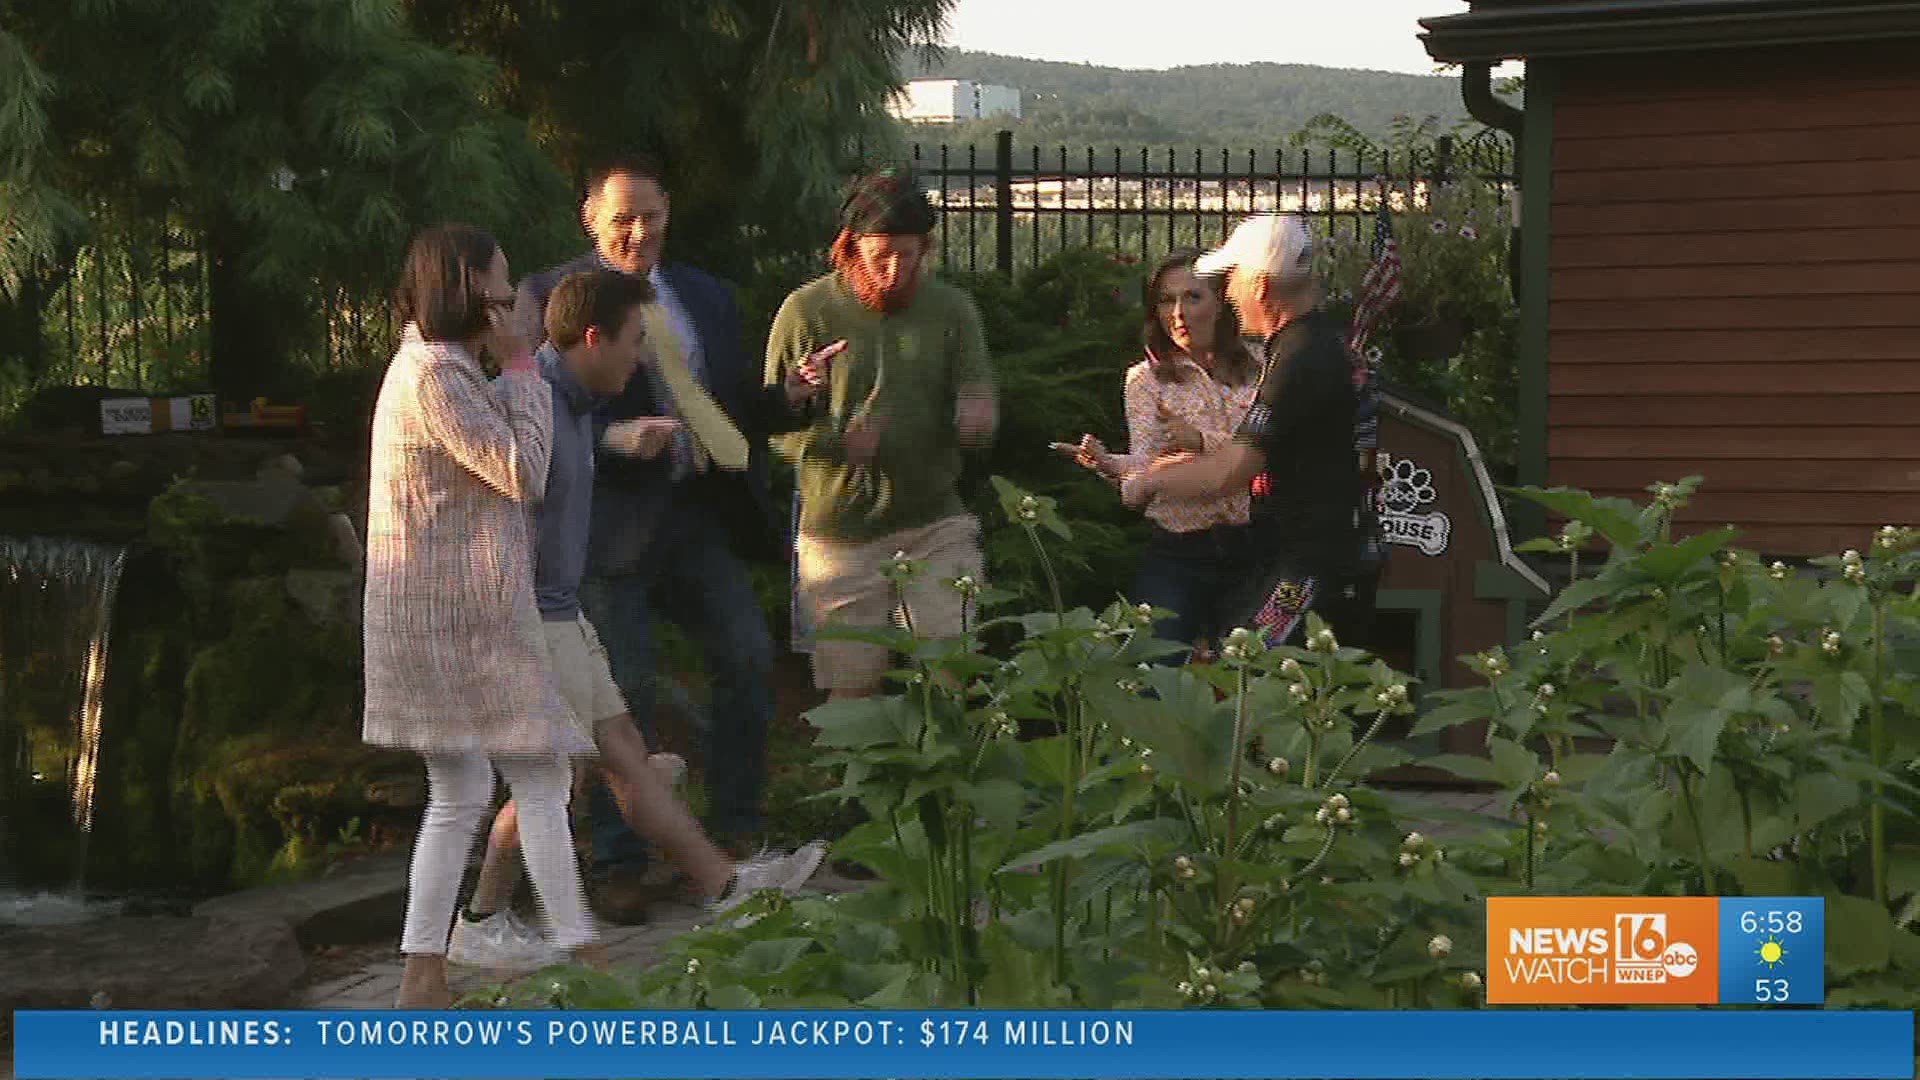 Joe, Chris, and some special guests invaded the backyard Friday morning to do a little jig.